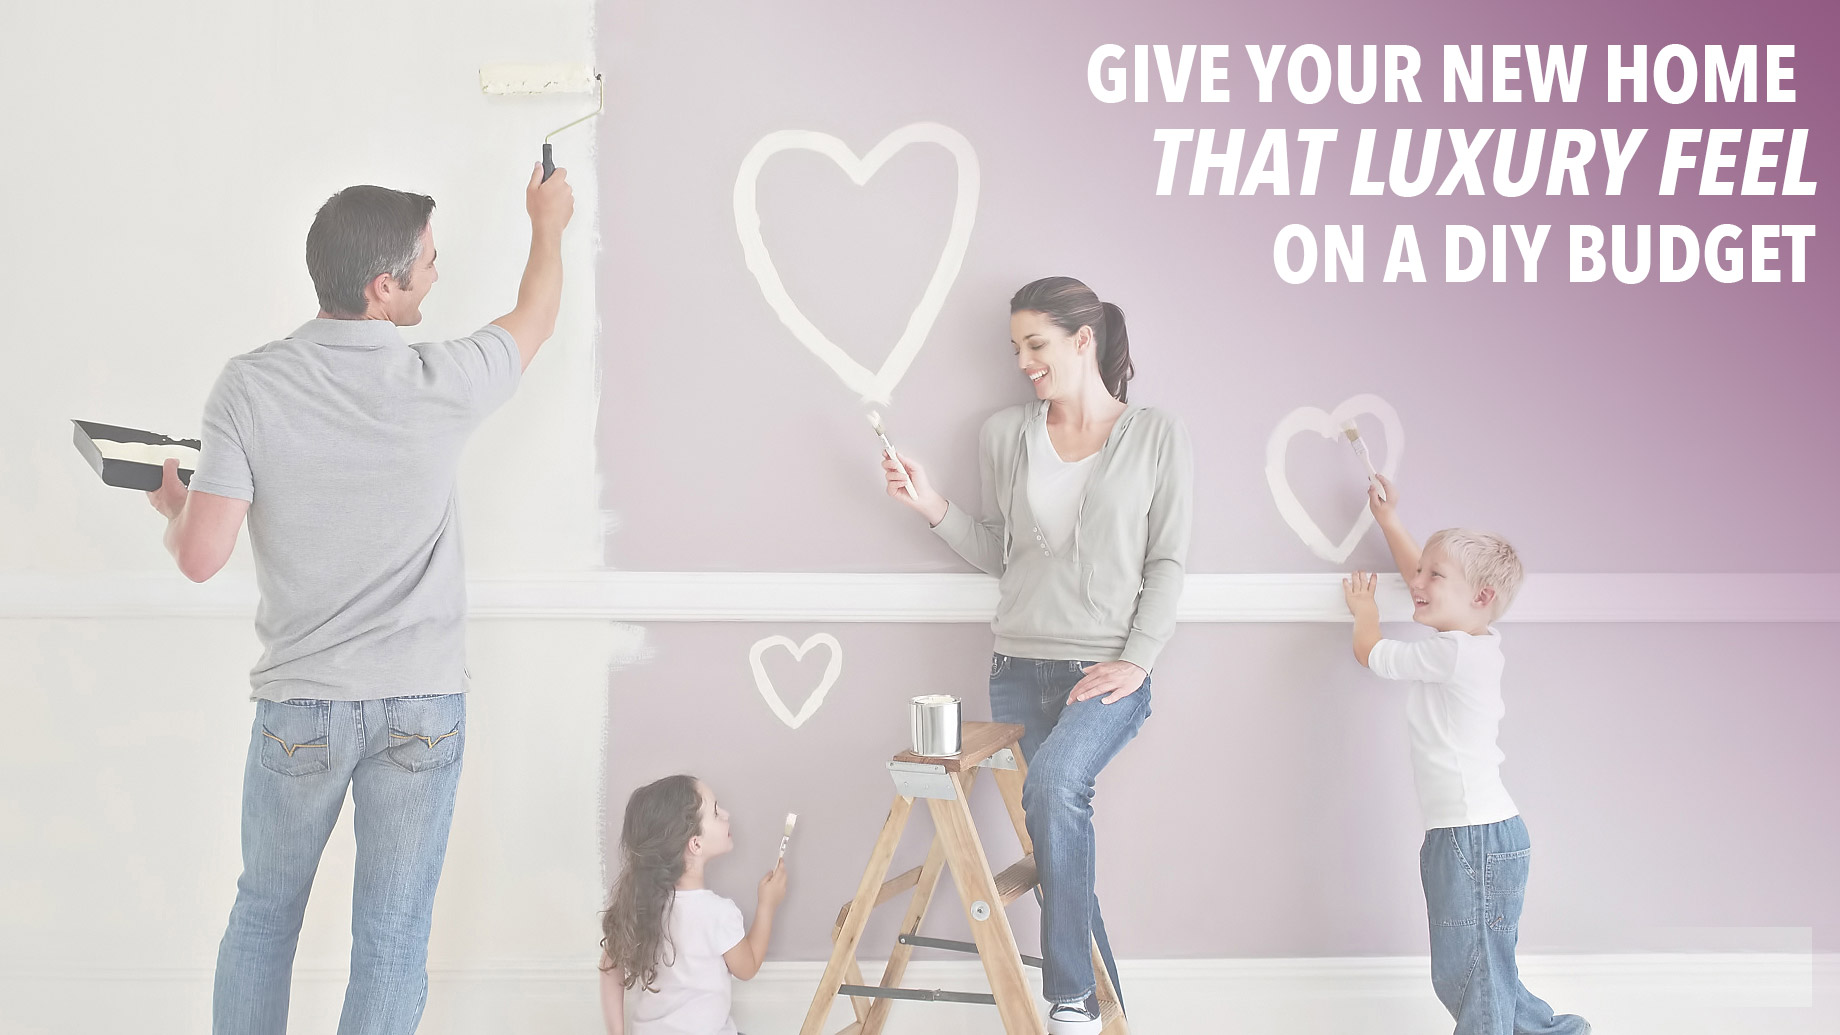 Give Your New Home That Luxury Feel on a DIY Budget